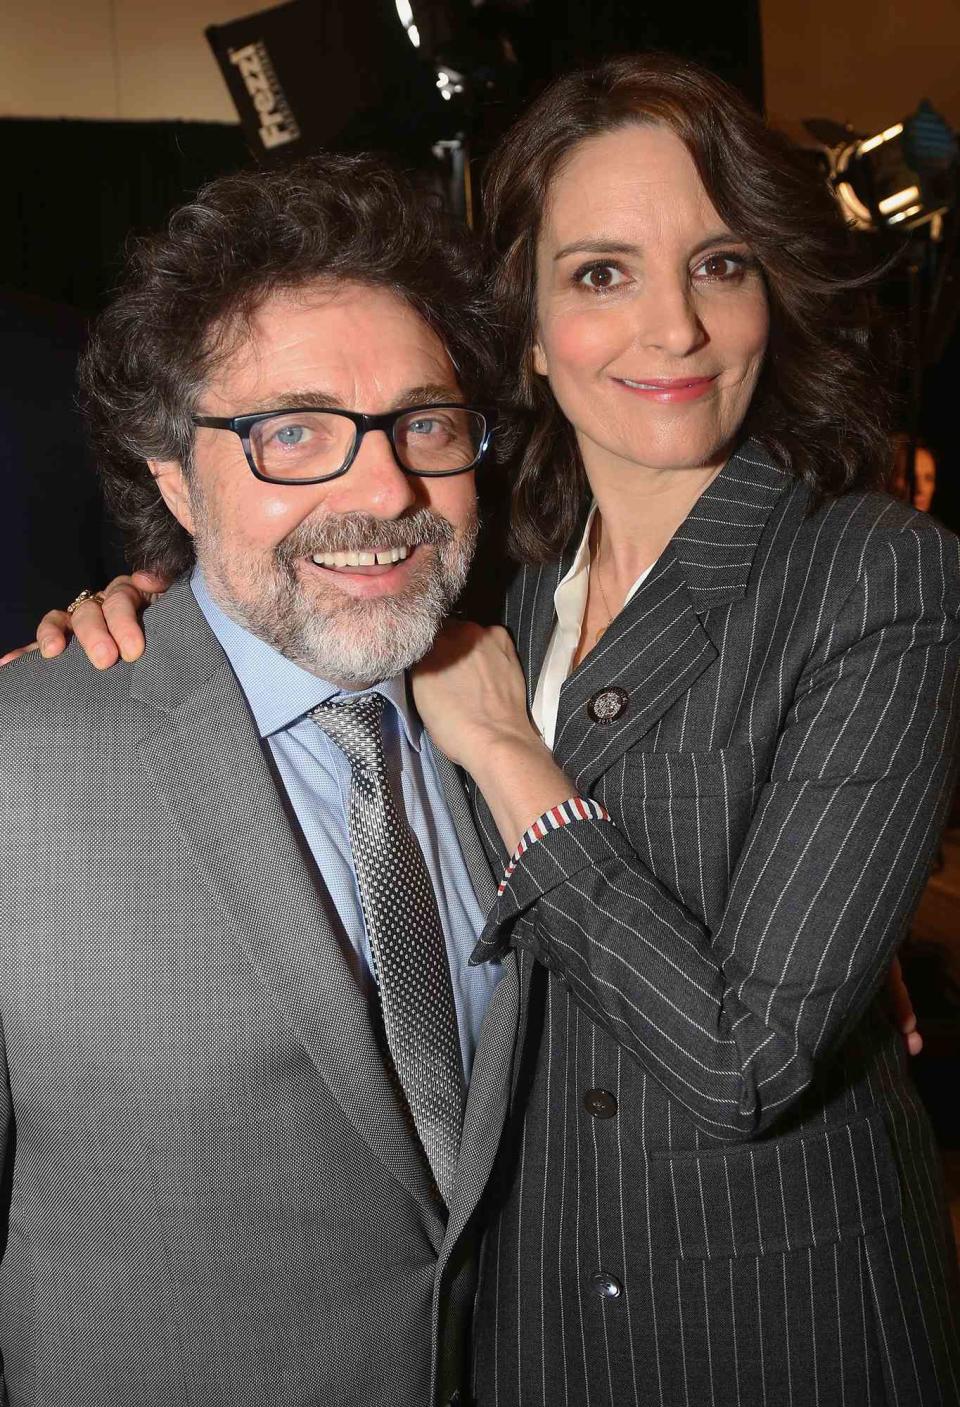 Jeff Richmond and Tina Fey pose at The 2018 Tony Award "Meet The Nominees" photo call & press junket at The Intercontinental New York Times Square on May 2, 2018 in New York City